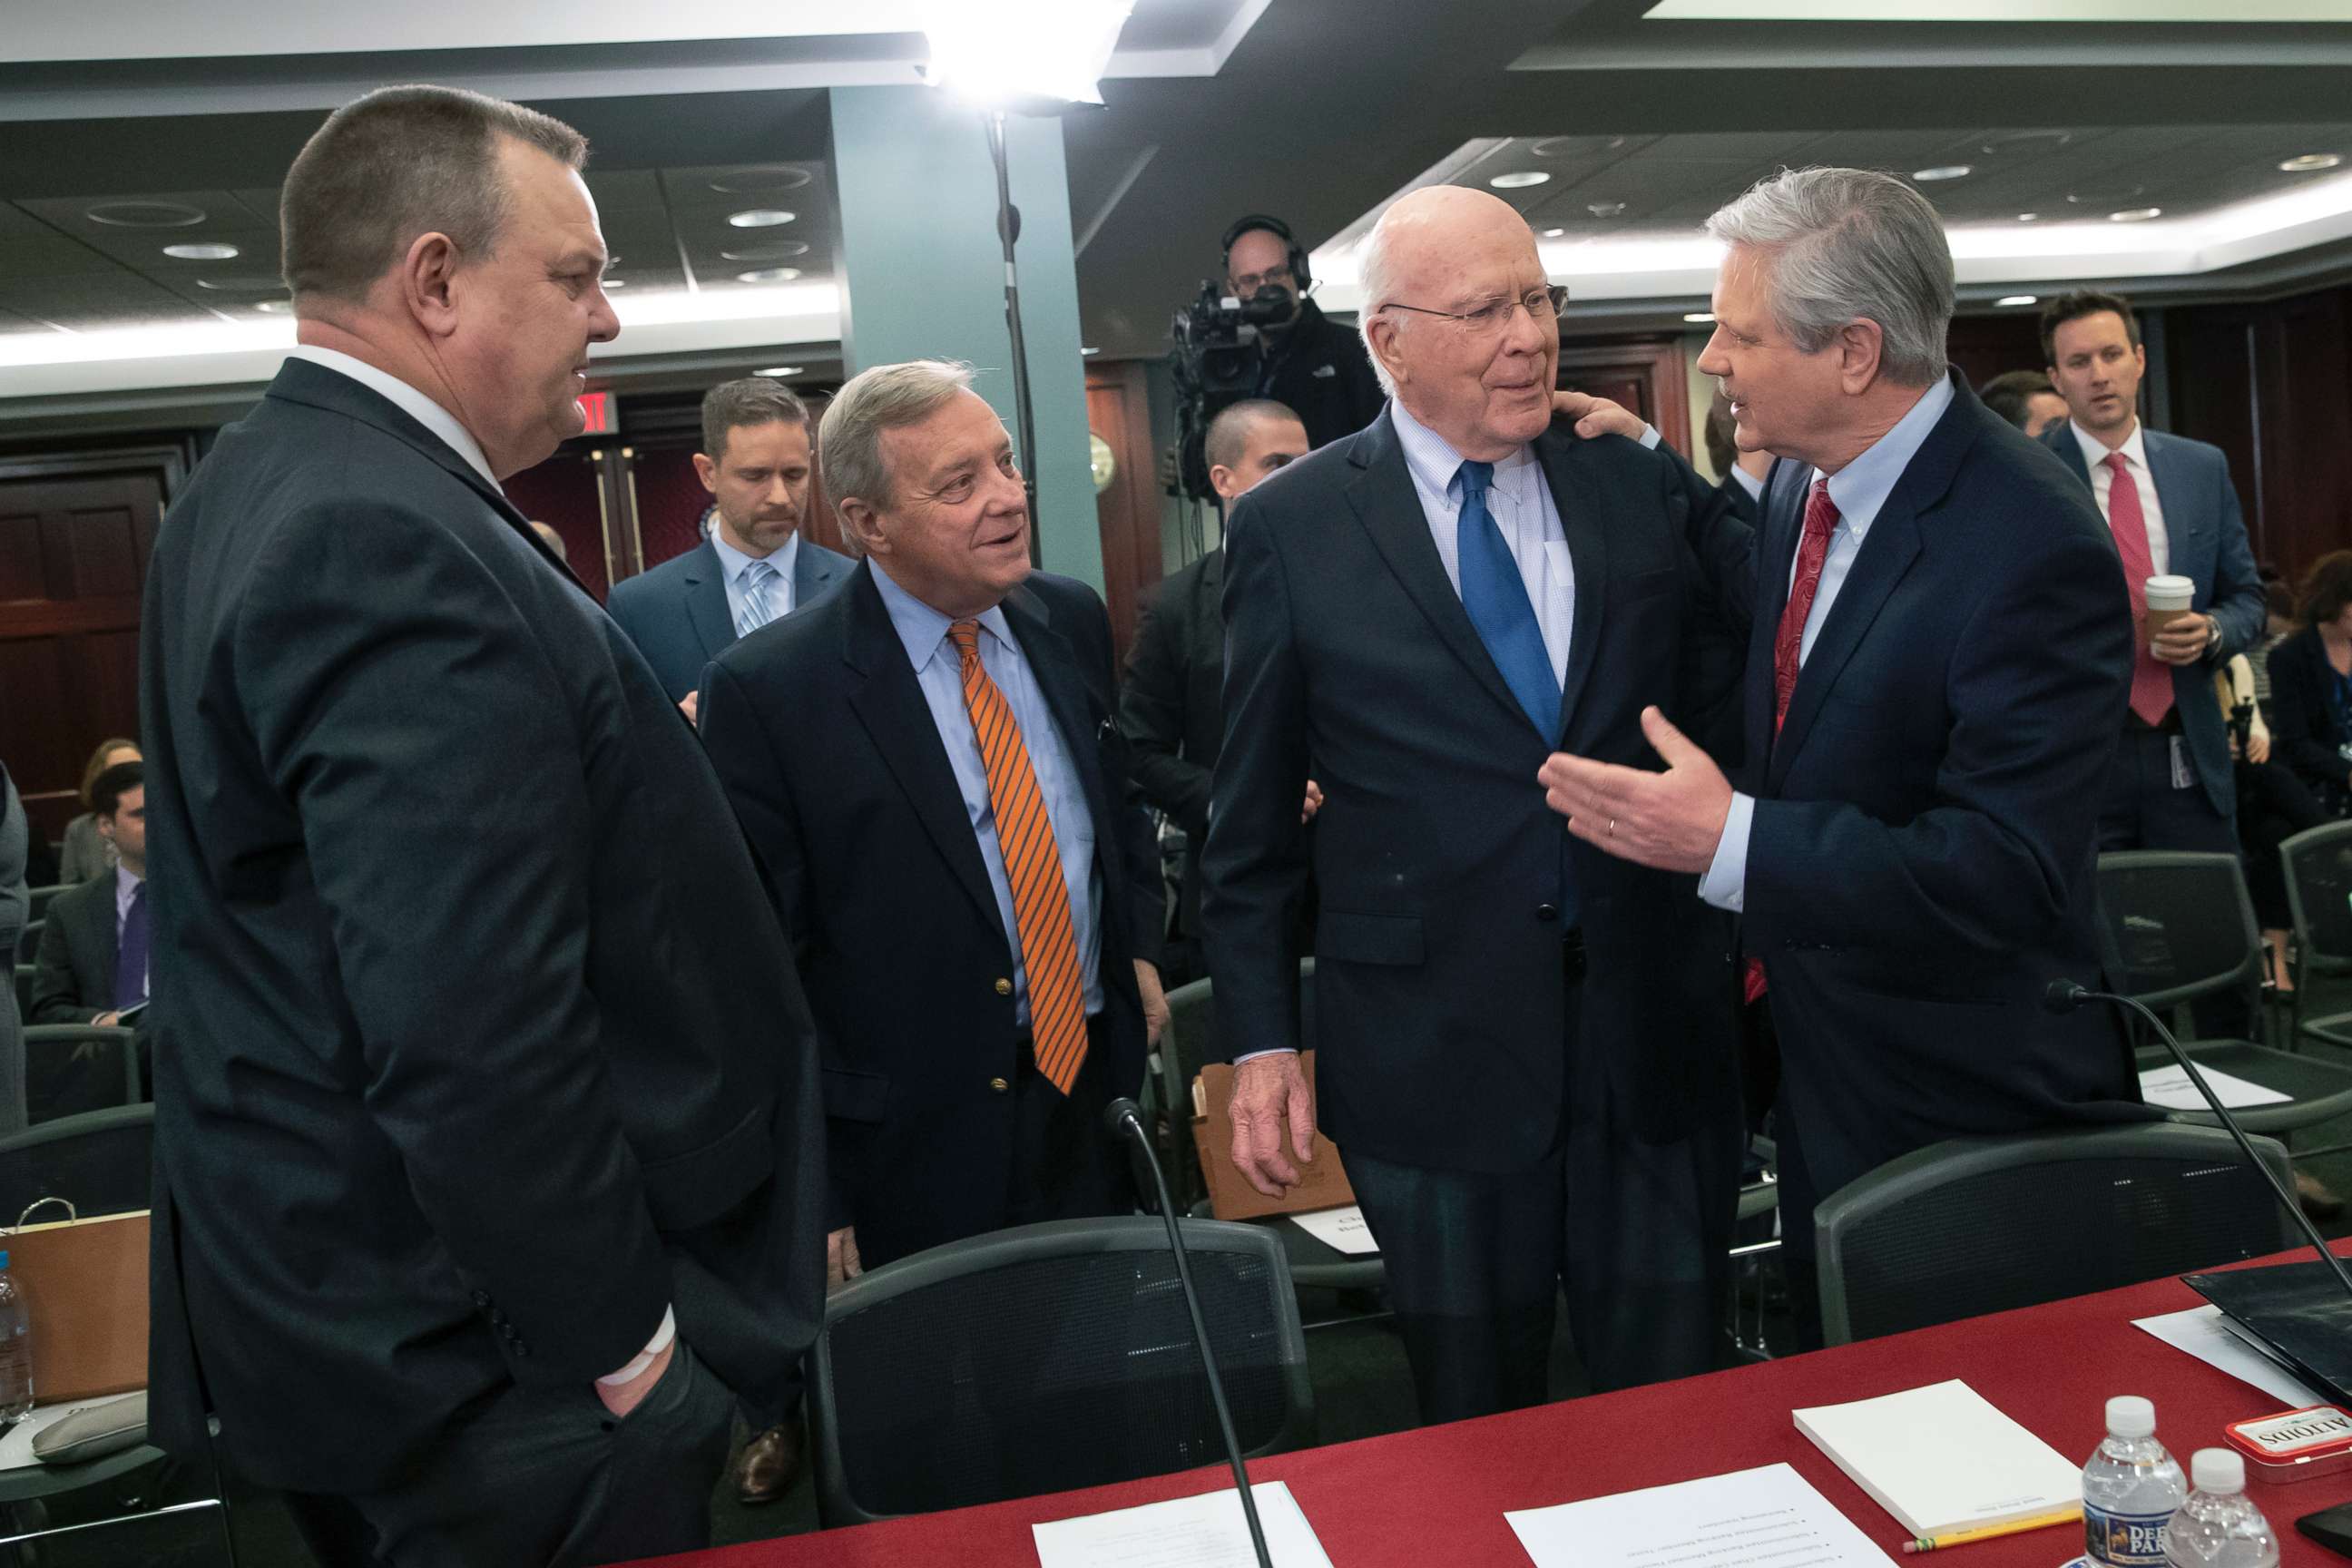 PHOTO: From left, senators, Jon Tester, Dick Durbin, Patrick Leahy and John Hoeven talk before a bipartisan group of House and Senate bargainers to craft a border security compromise at the Capitol in Washington, Jan. 30, 2019.